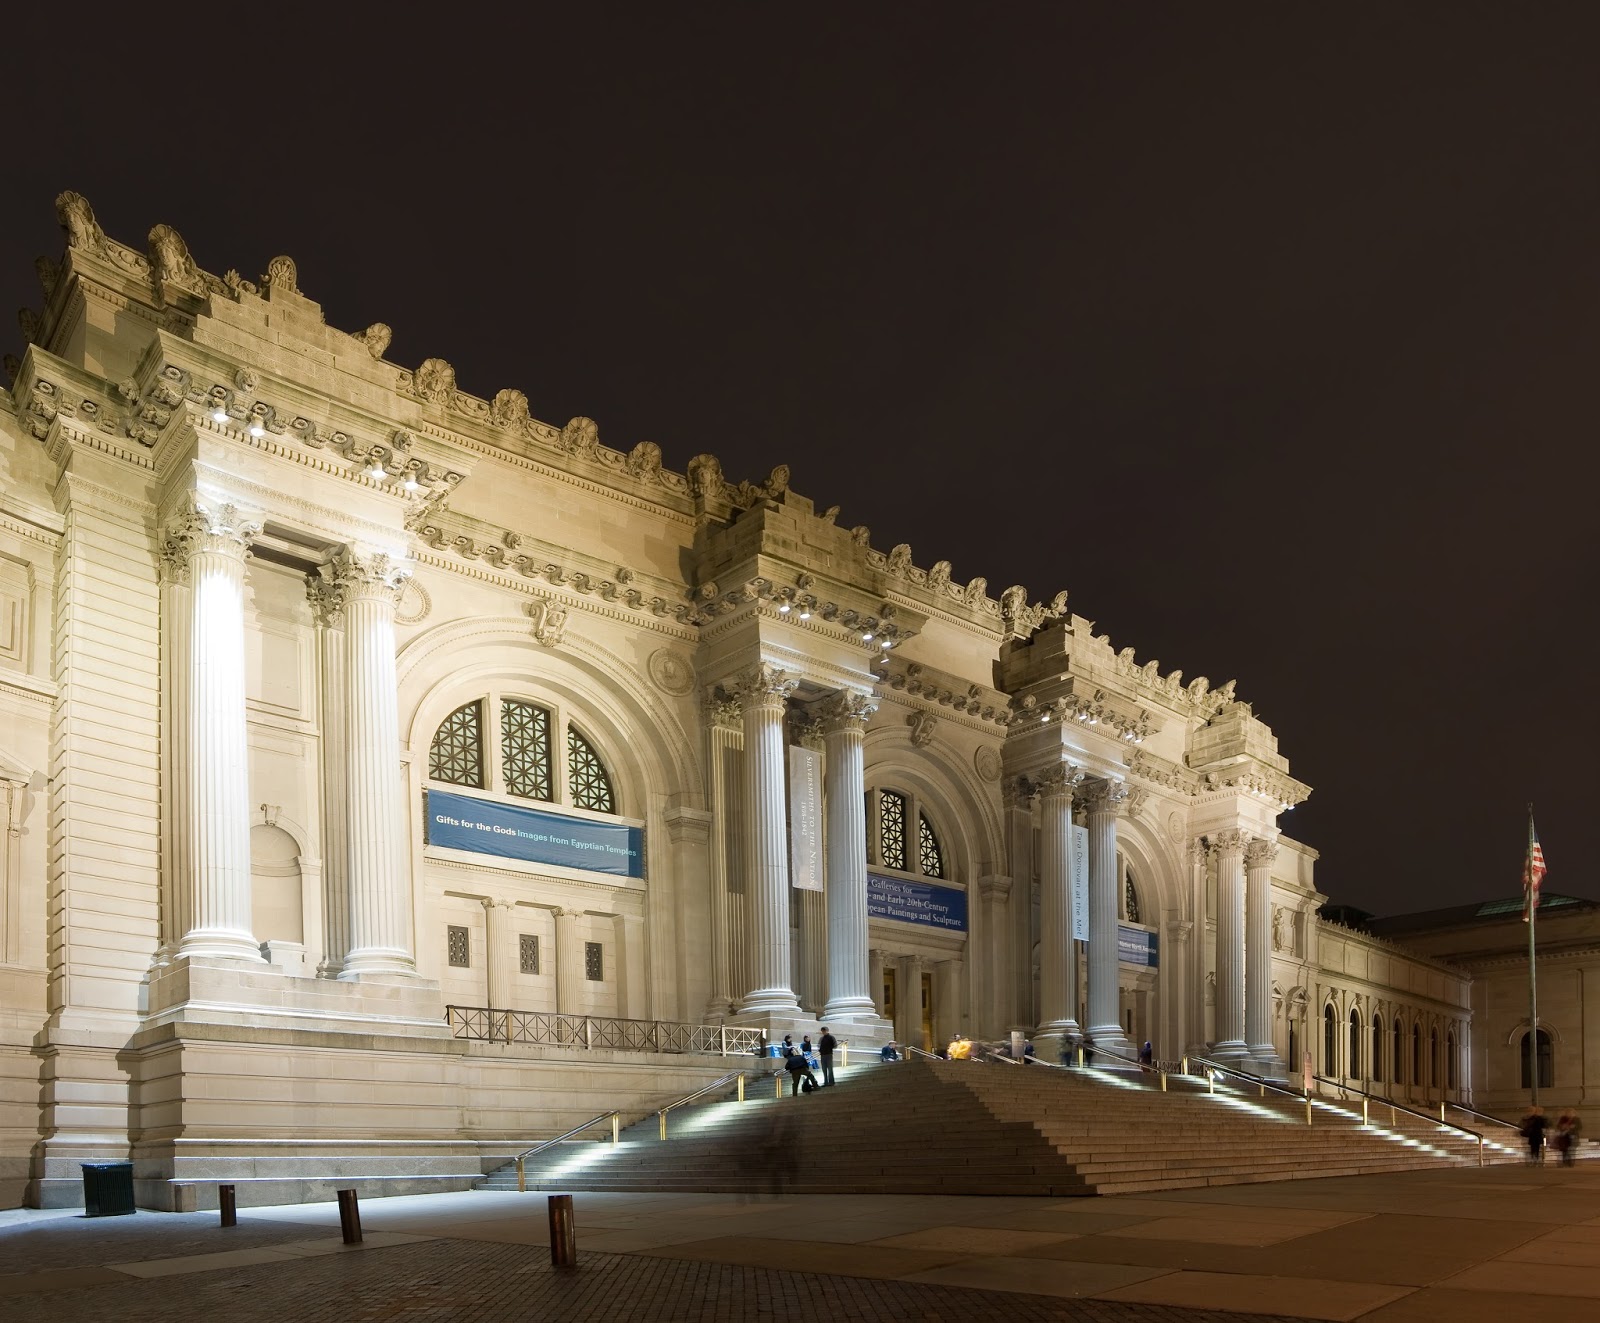 These Are The 25 Best Museums In The World - Metropolitan Museum of Art